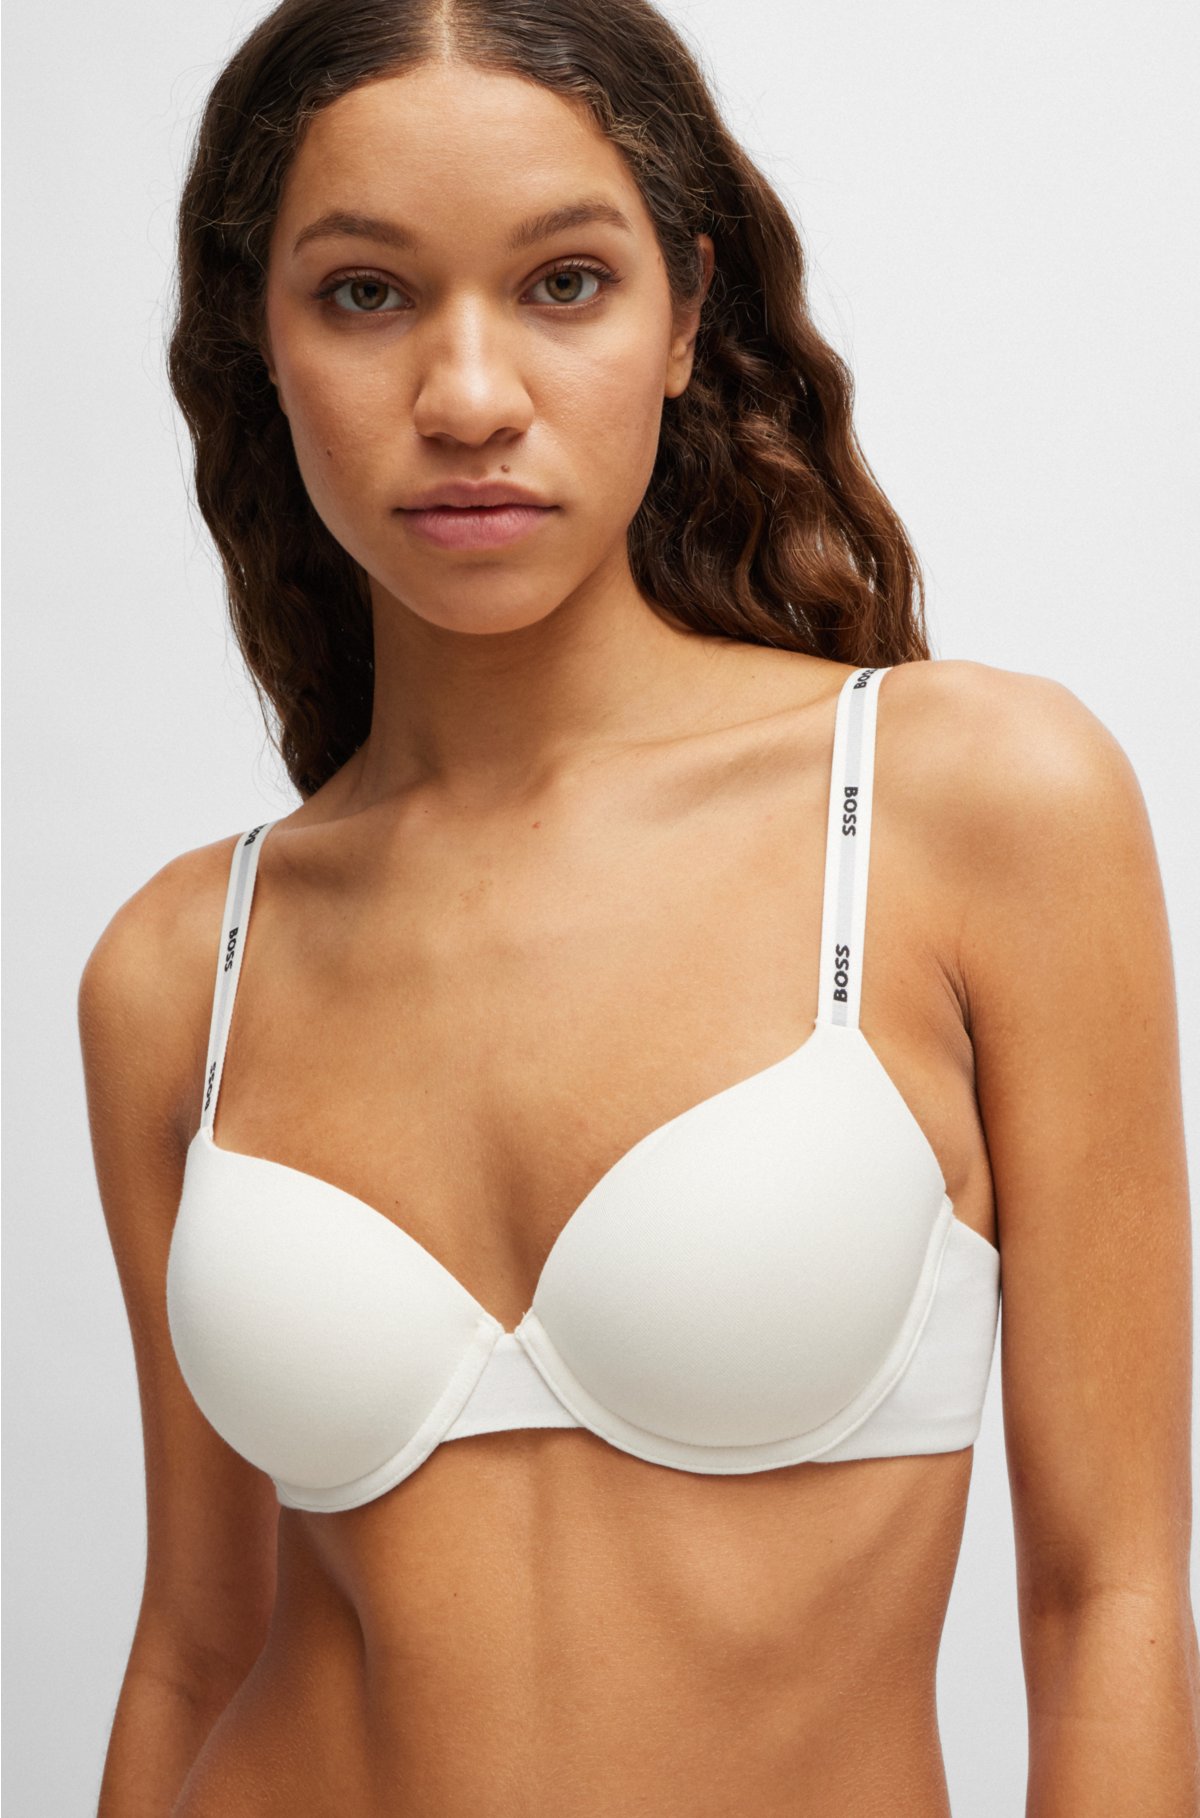 Underwired padded bra with adjustable branded straps, White / Black